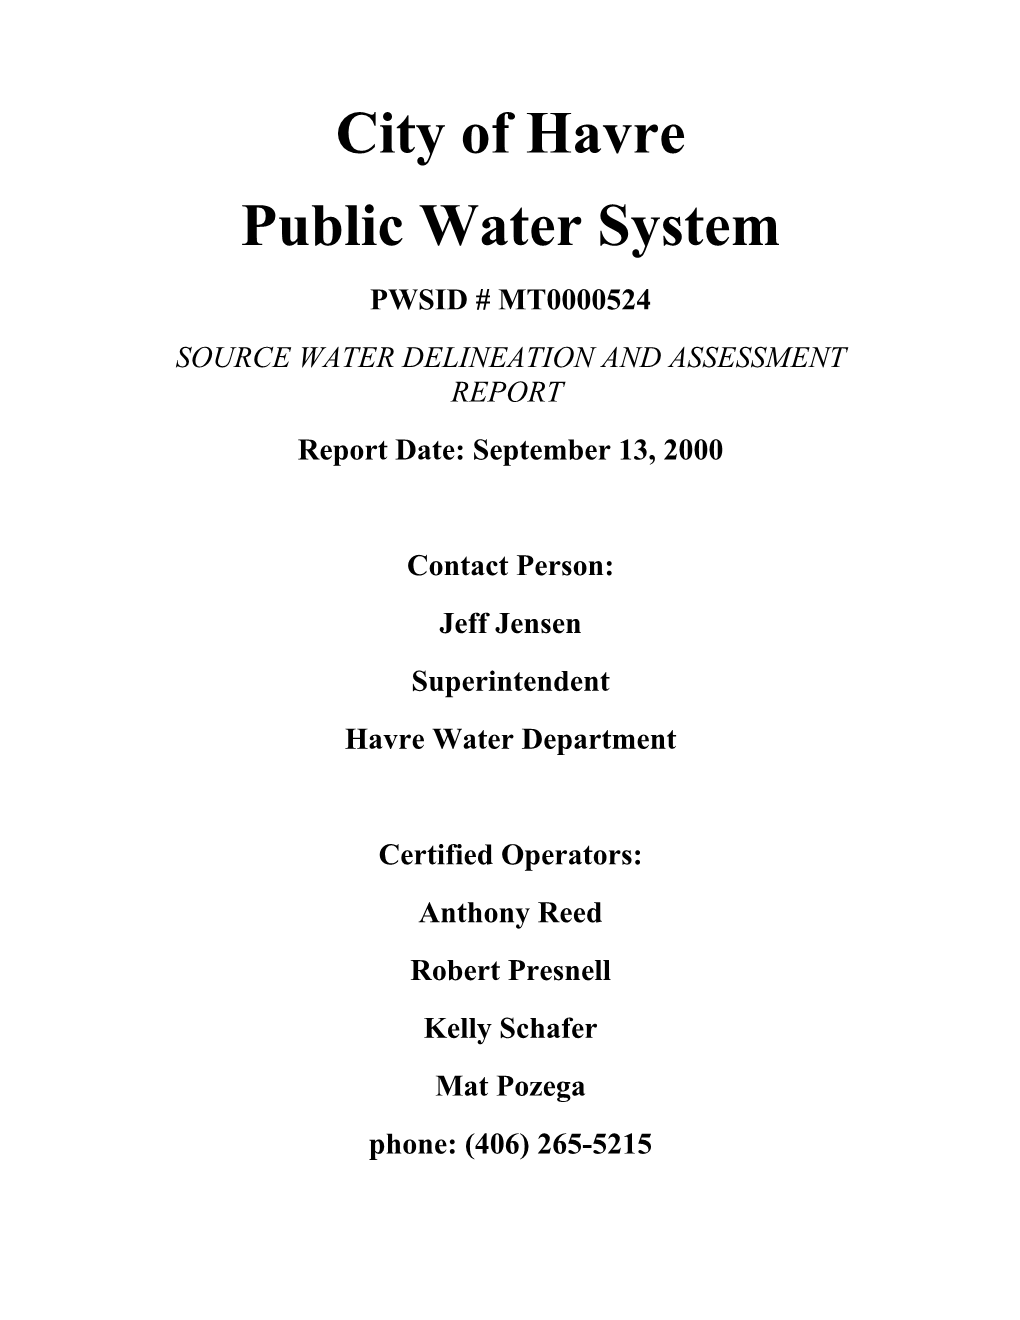 City of Havre Public Water System PWSID # MT0000524 SOURCE WATER DELINEATION and ASSESSMENT REPORT Report Date: September 13, 2000